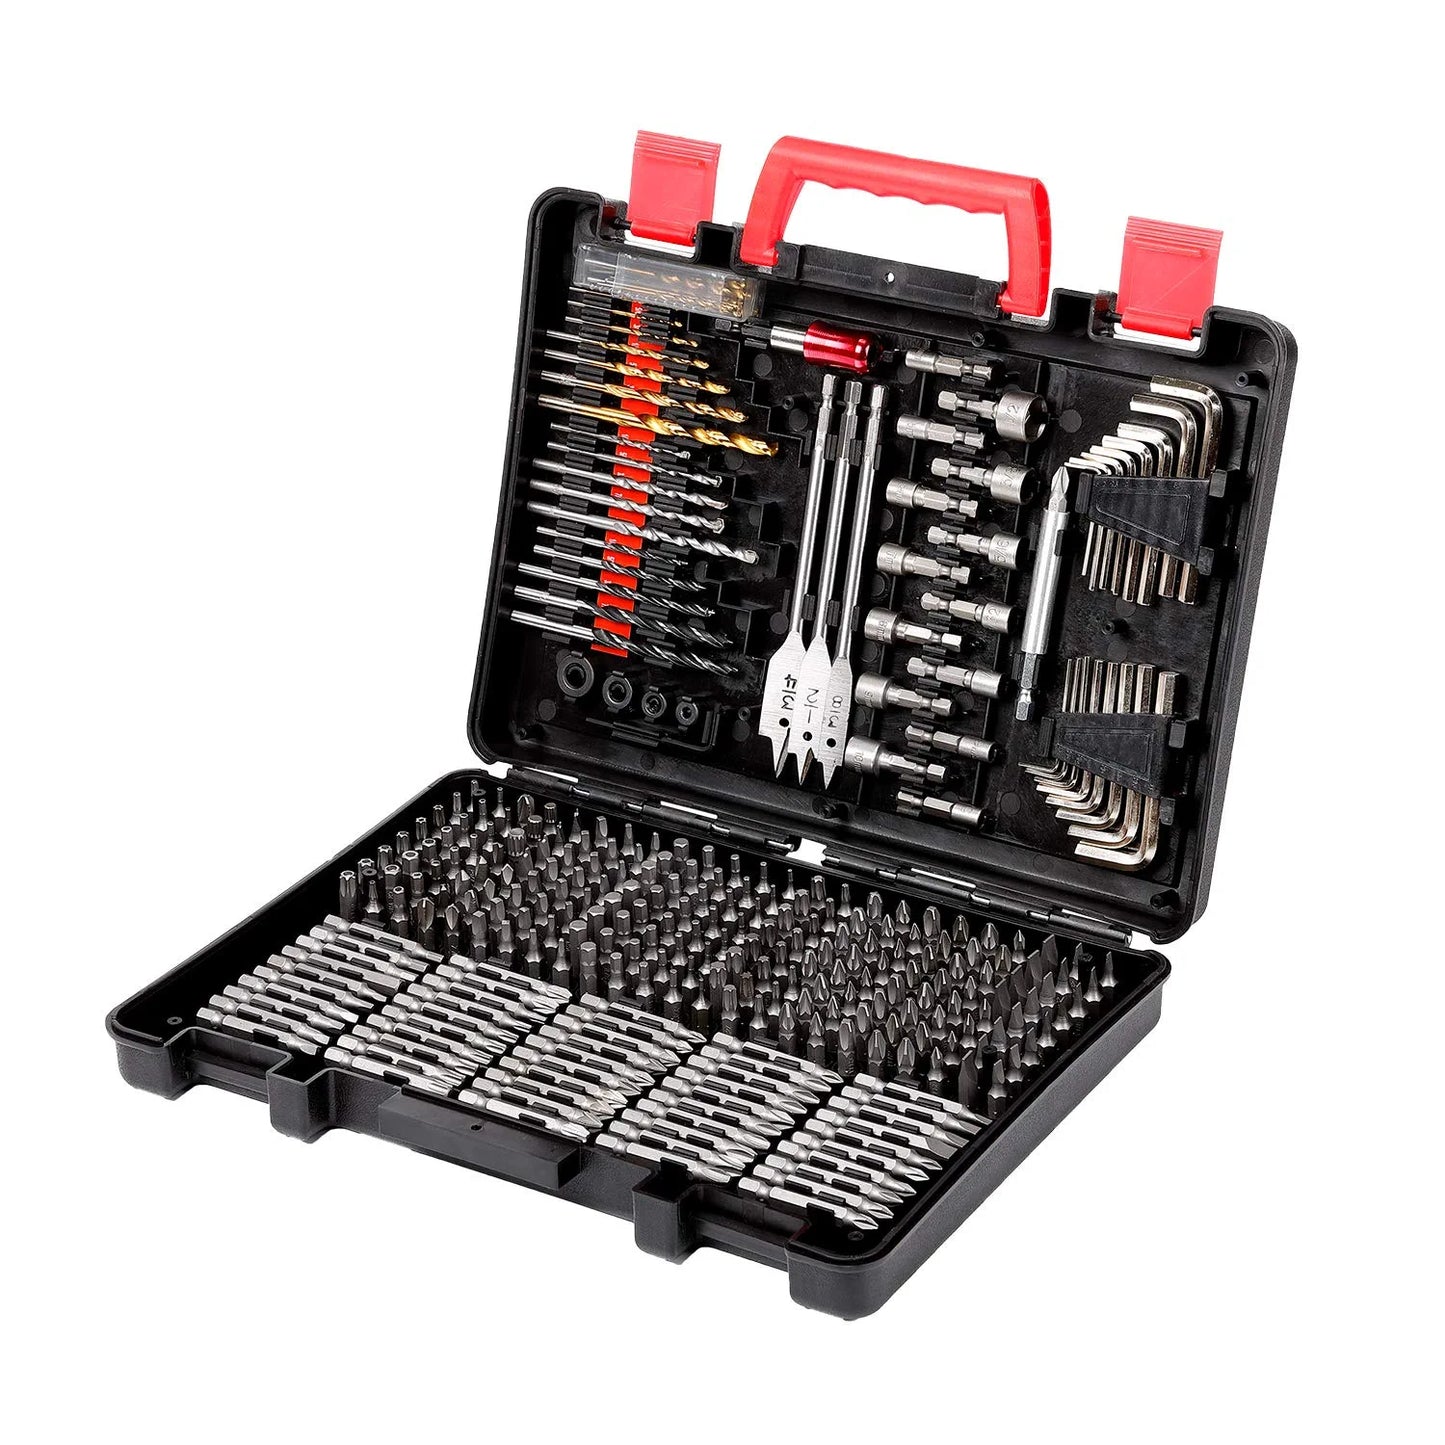 Drilling and Driving Accessory Kit (KingTool 318-Pieces Screwdriver and Drill Bit Set)